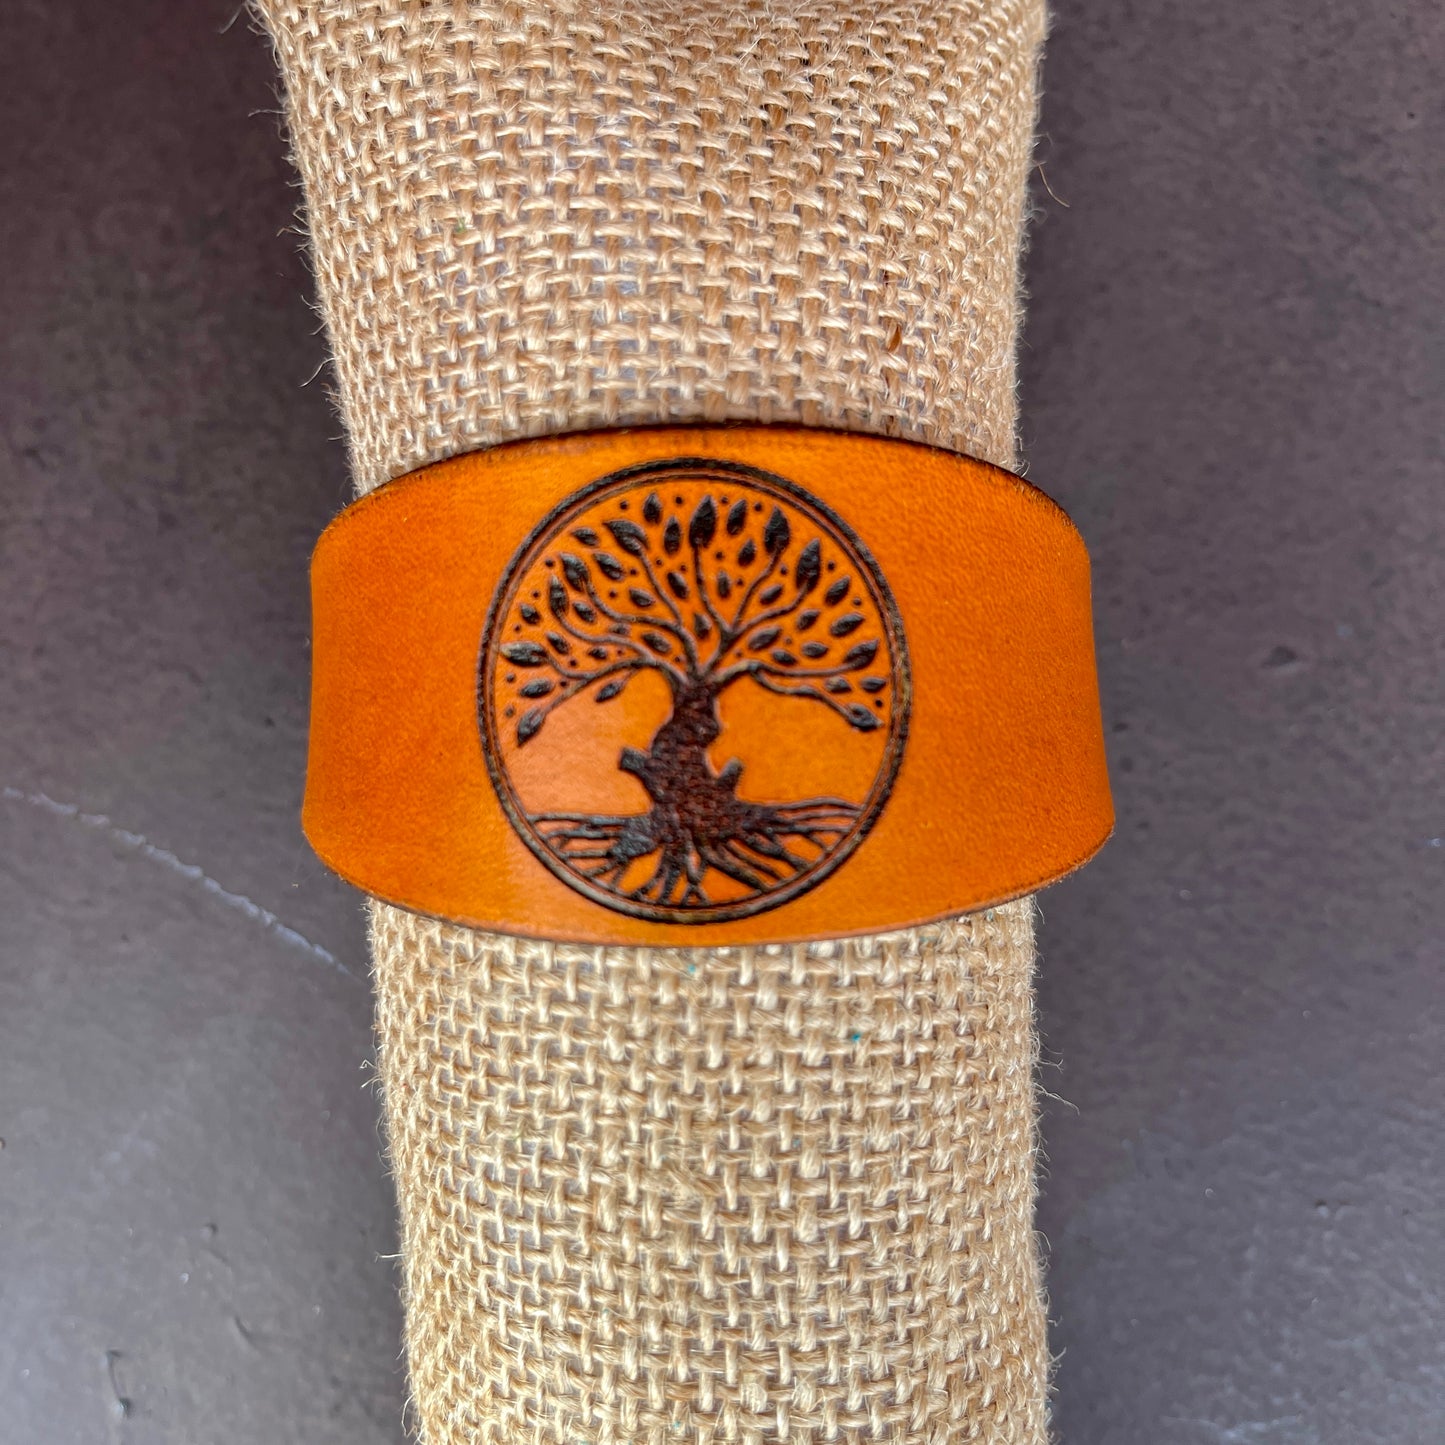 HANDCRAFTED TREE OF LIFE LEATHER CUFF